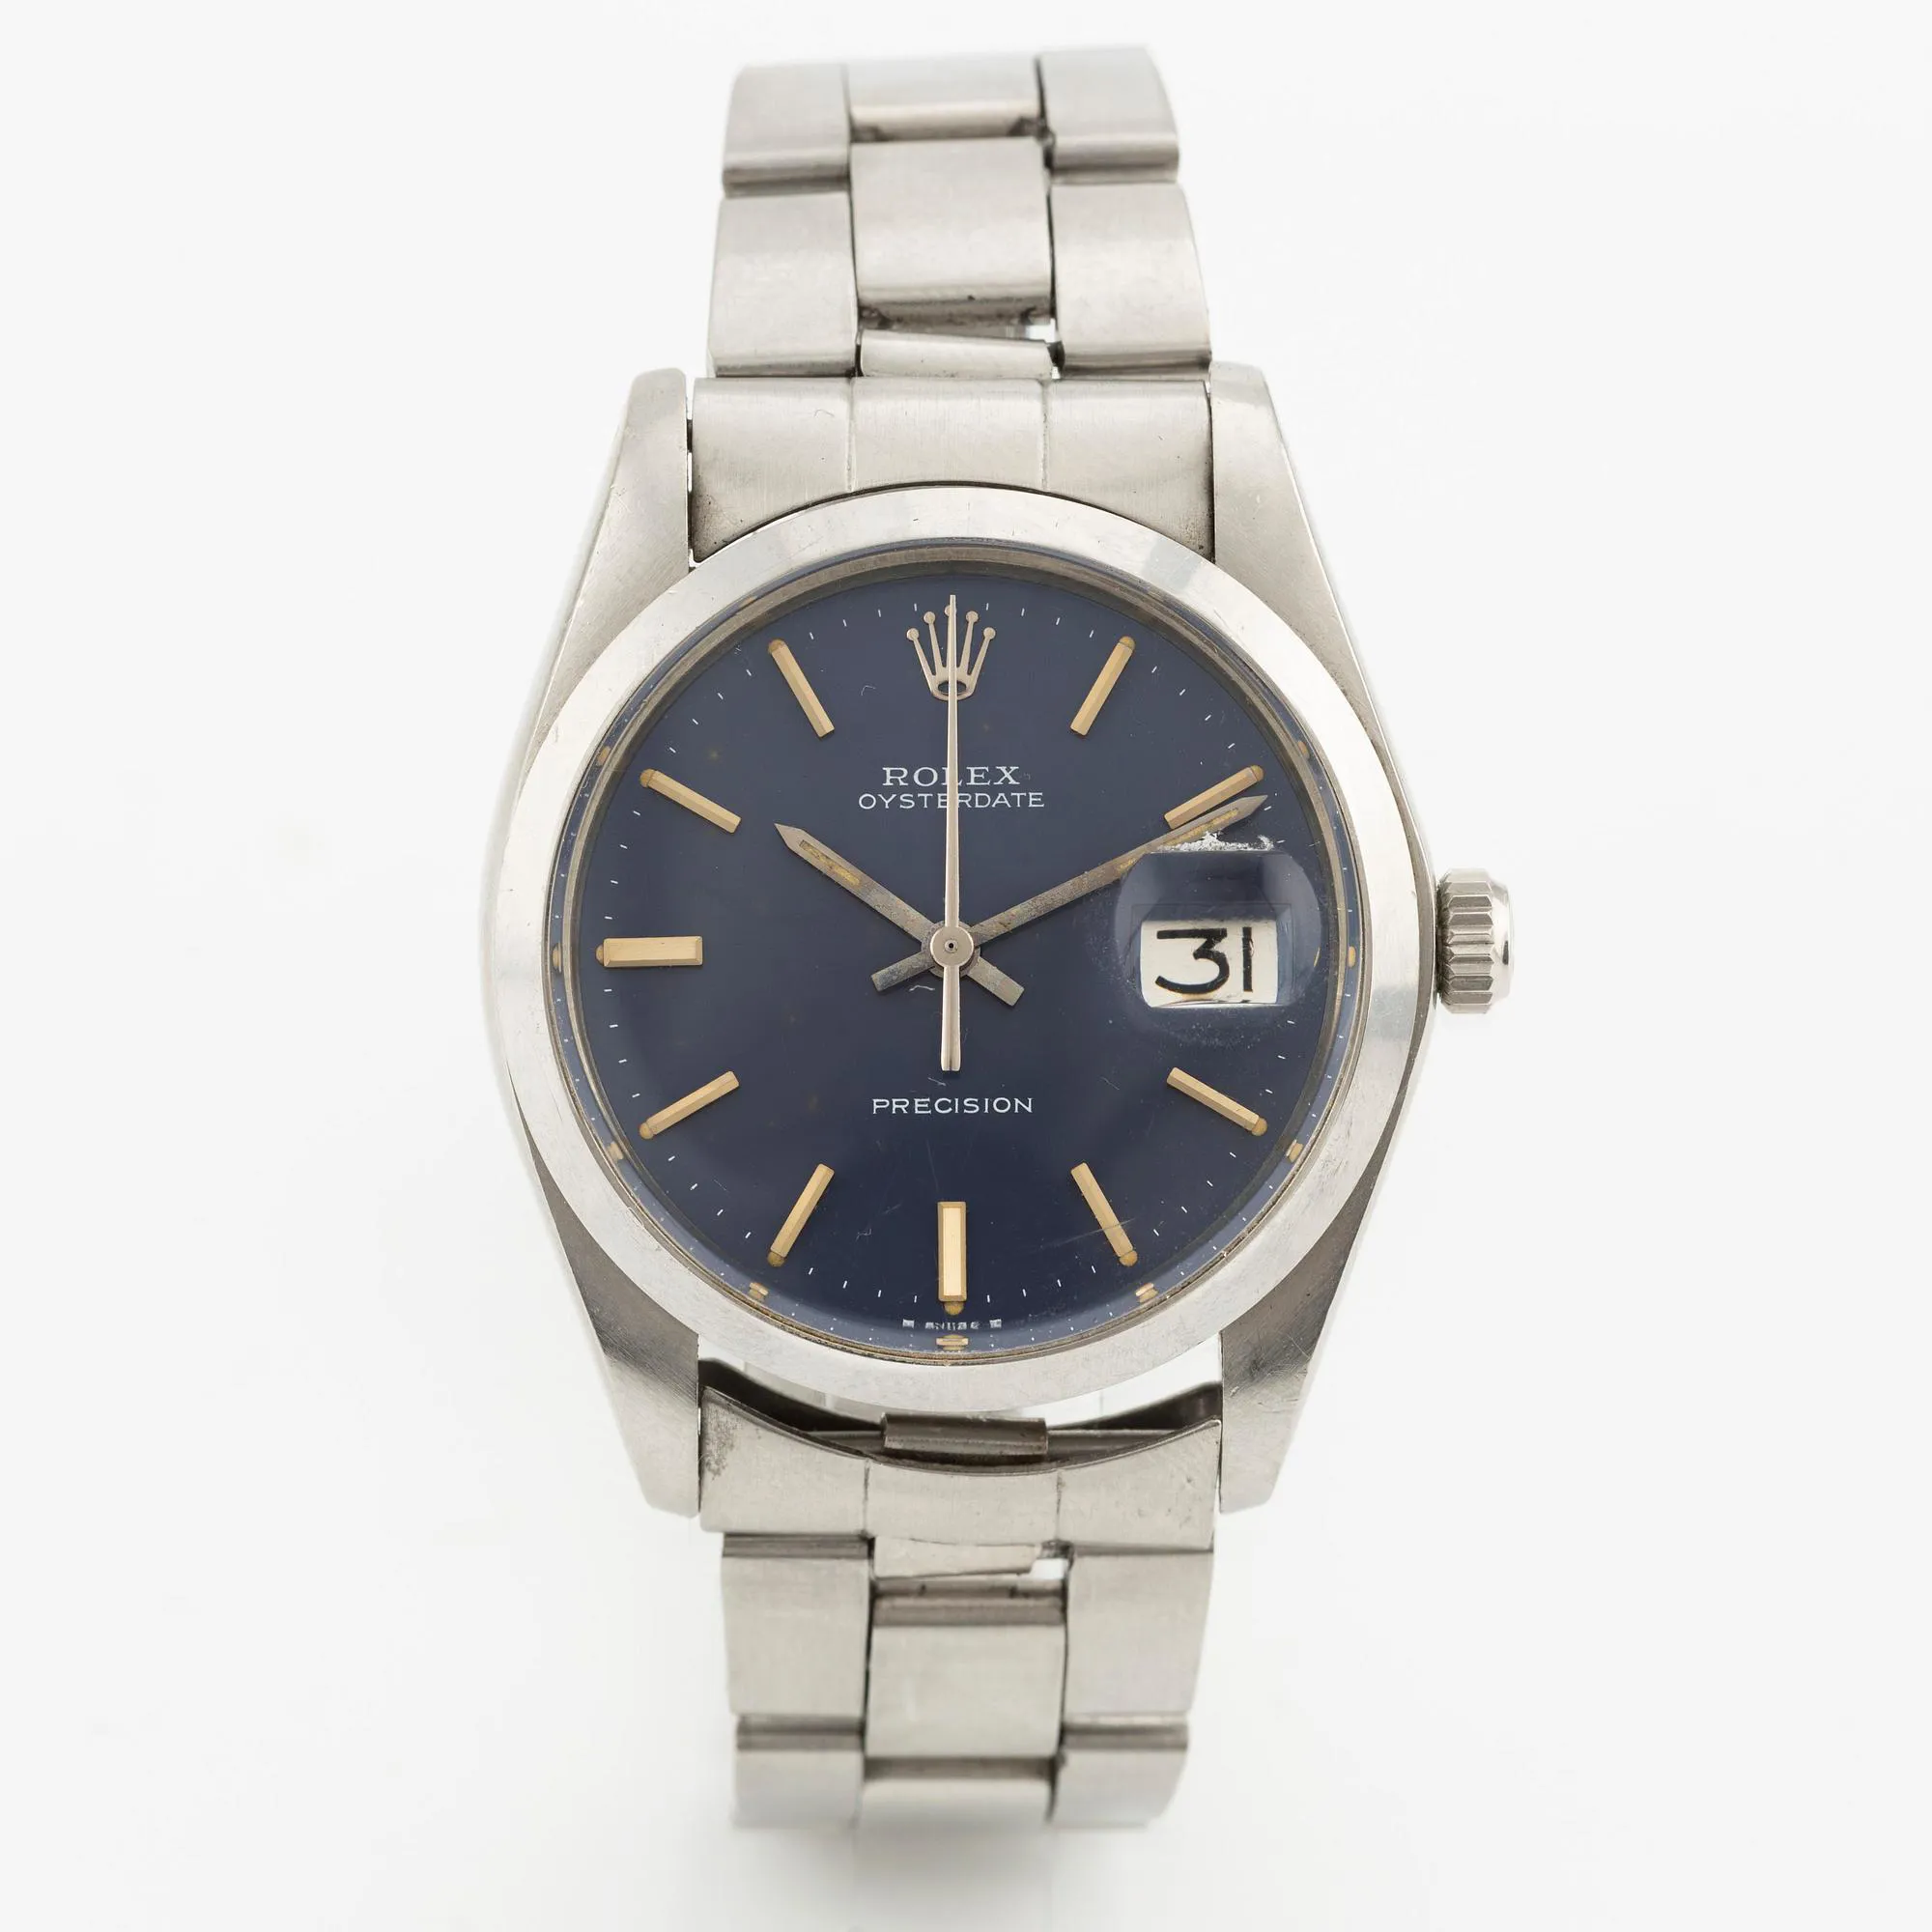 Rolex Oysterdate Precision 6694 34mm Stainless steel